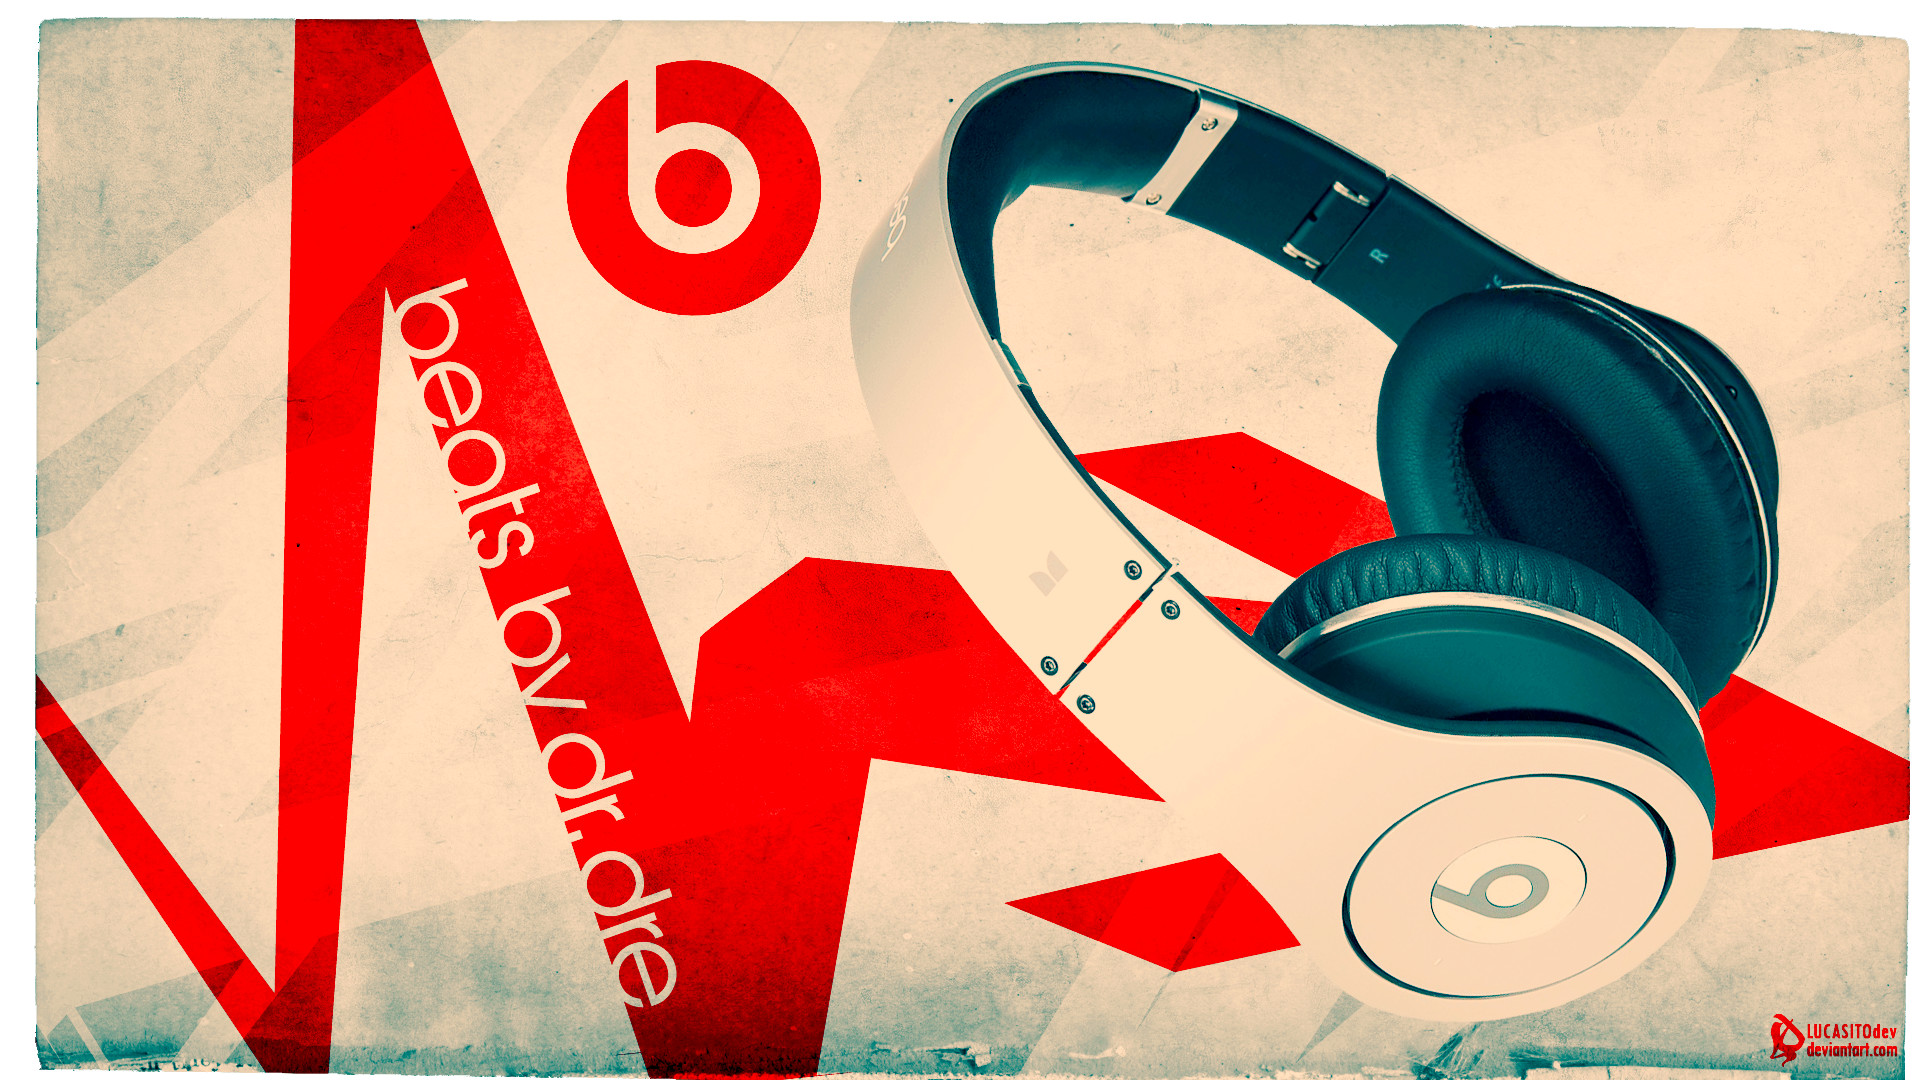 1920x1080 ... beats by dr.dre Wallpaper by lucasitodesign